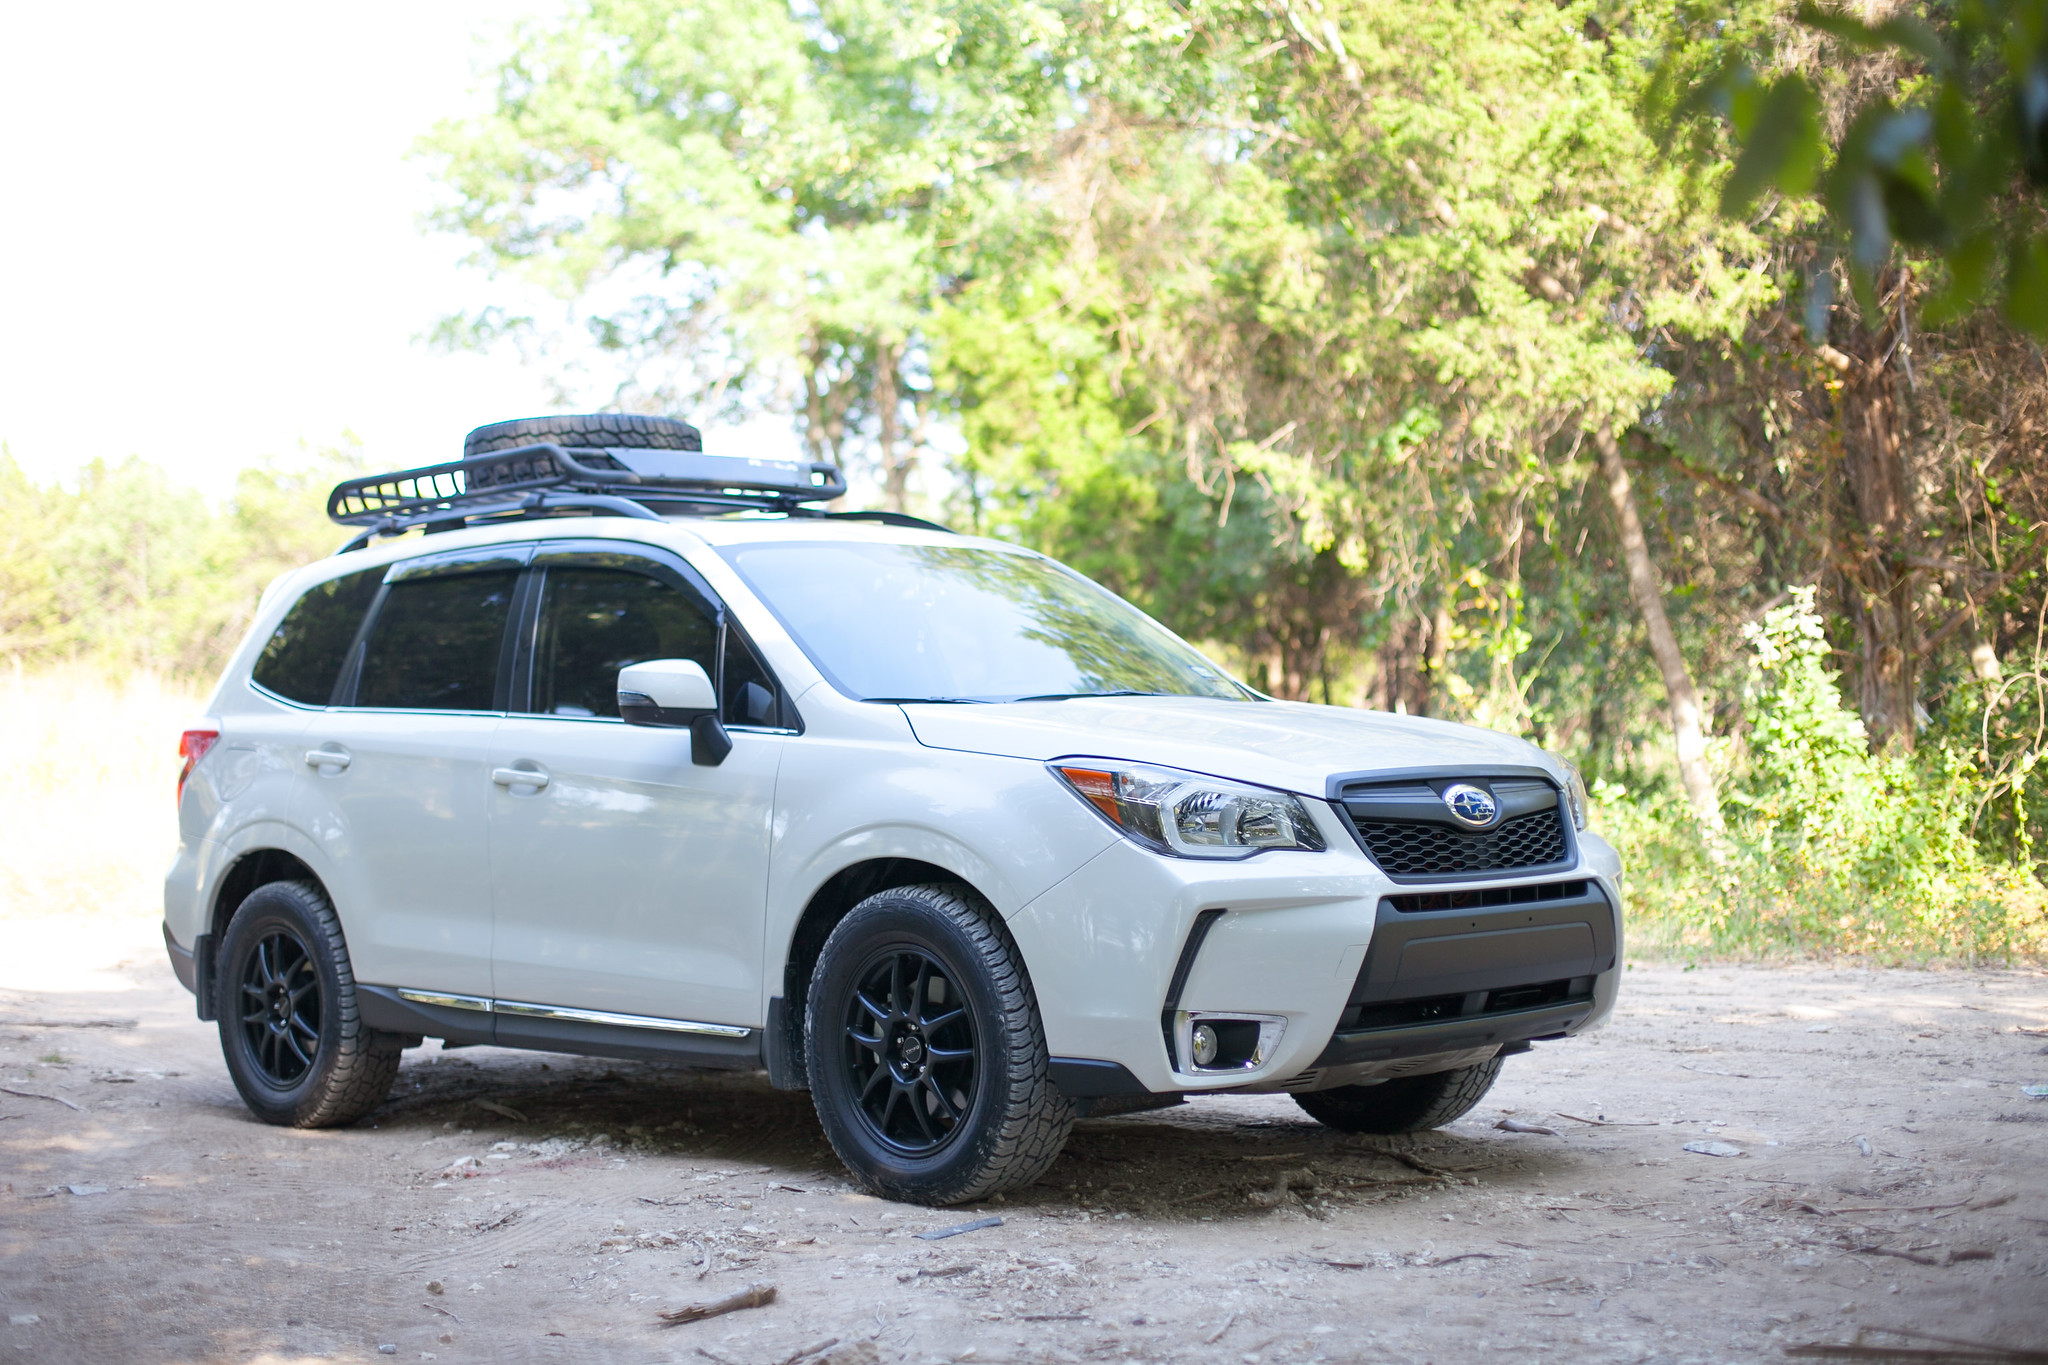 2016 forester xt limited owner manual pdf